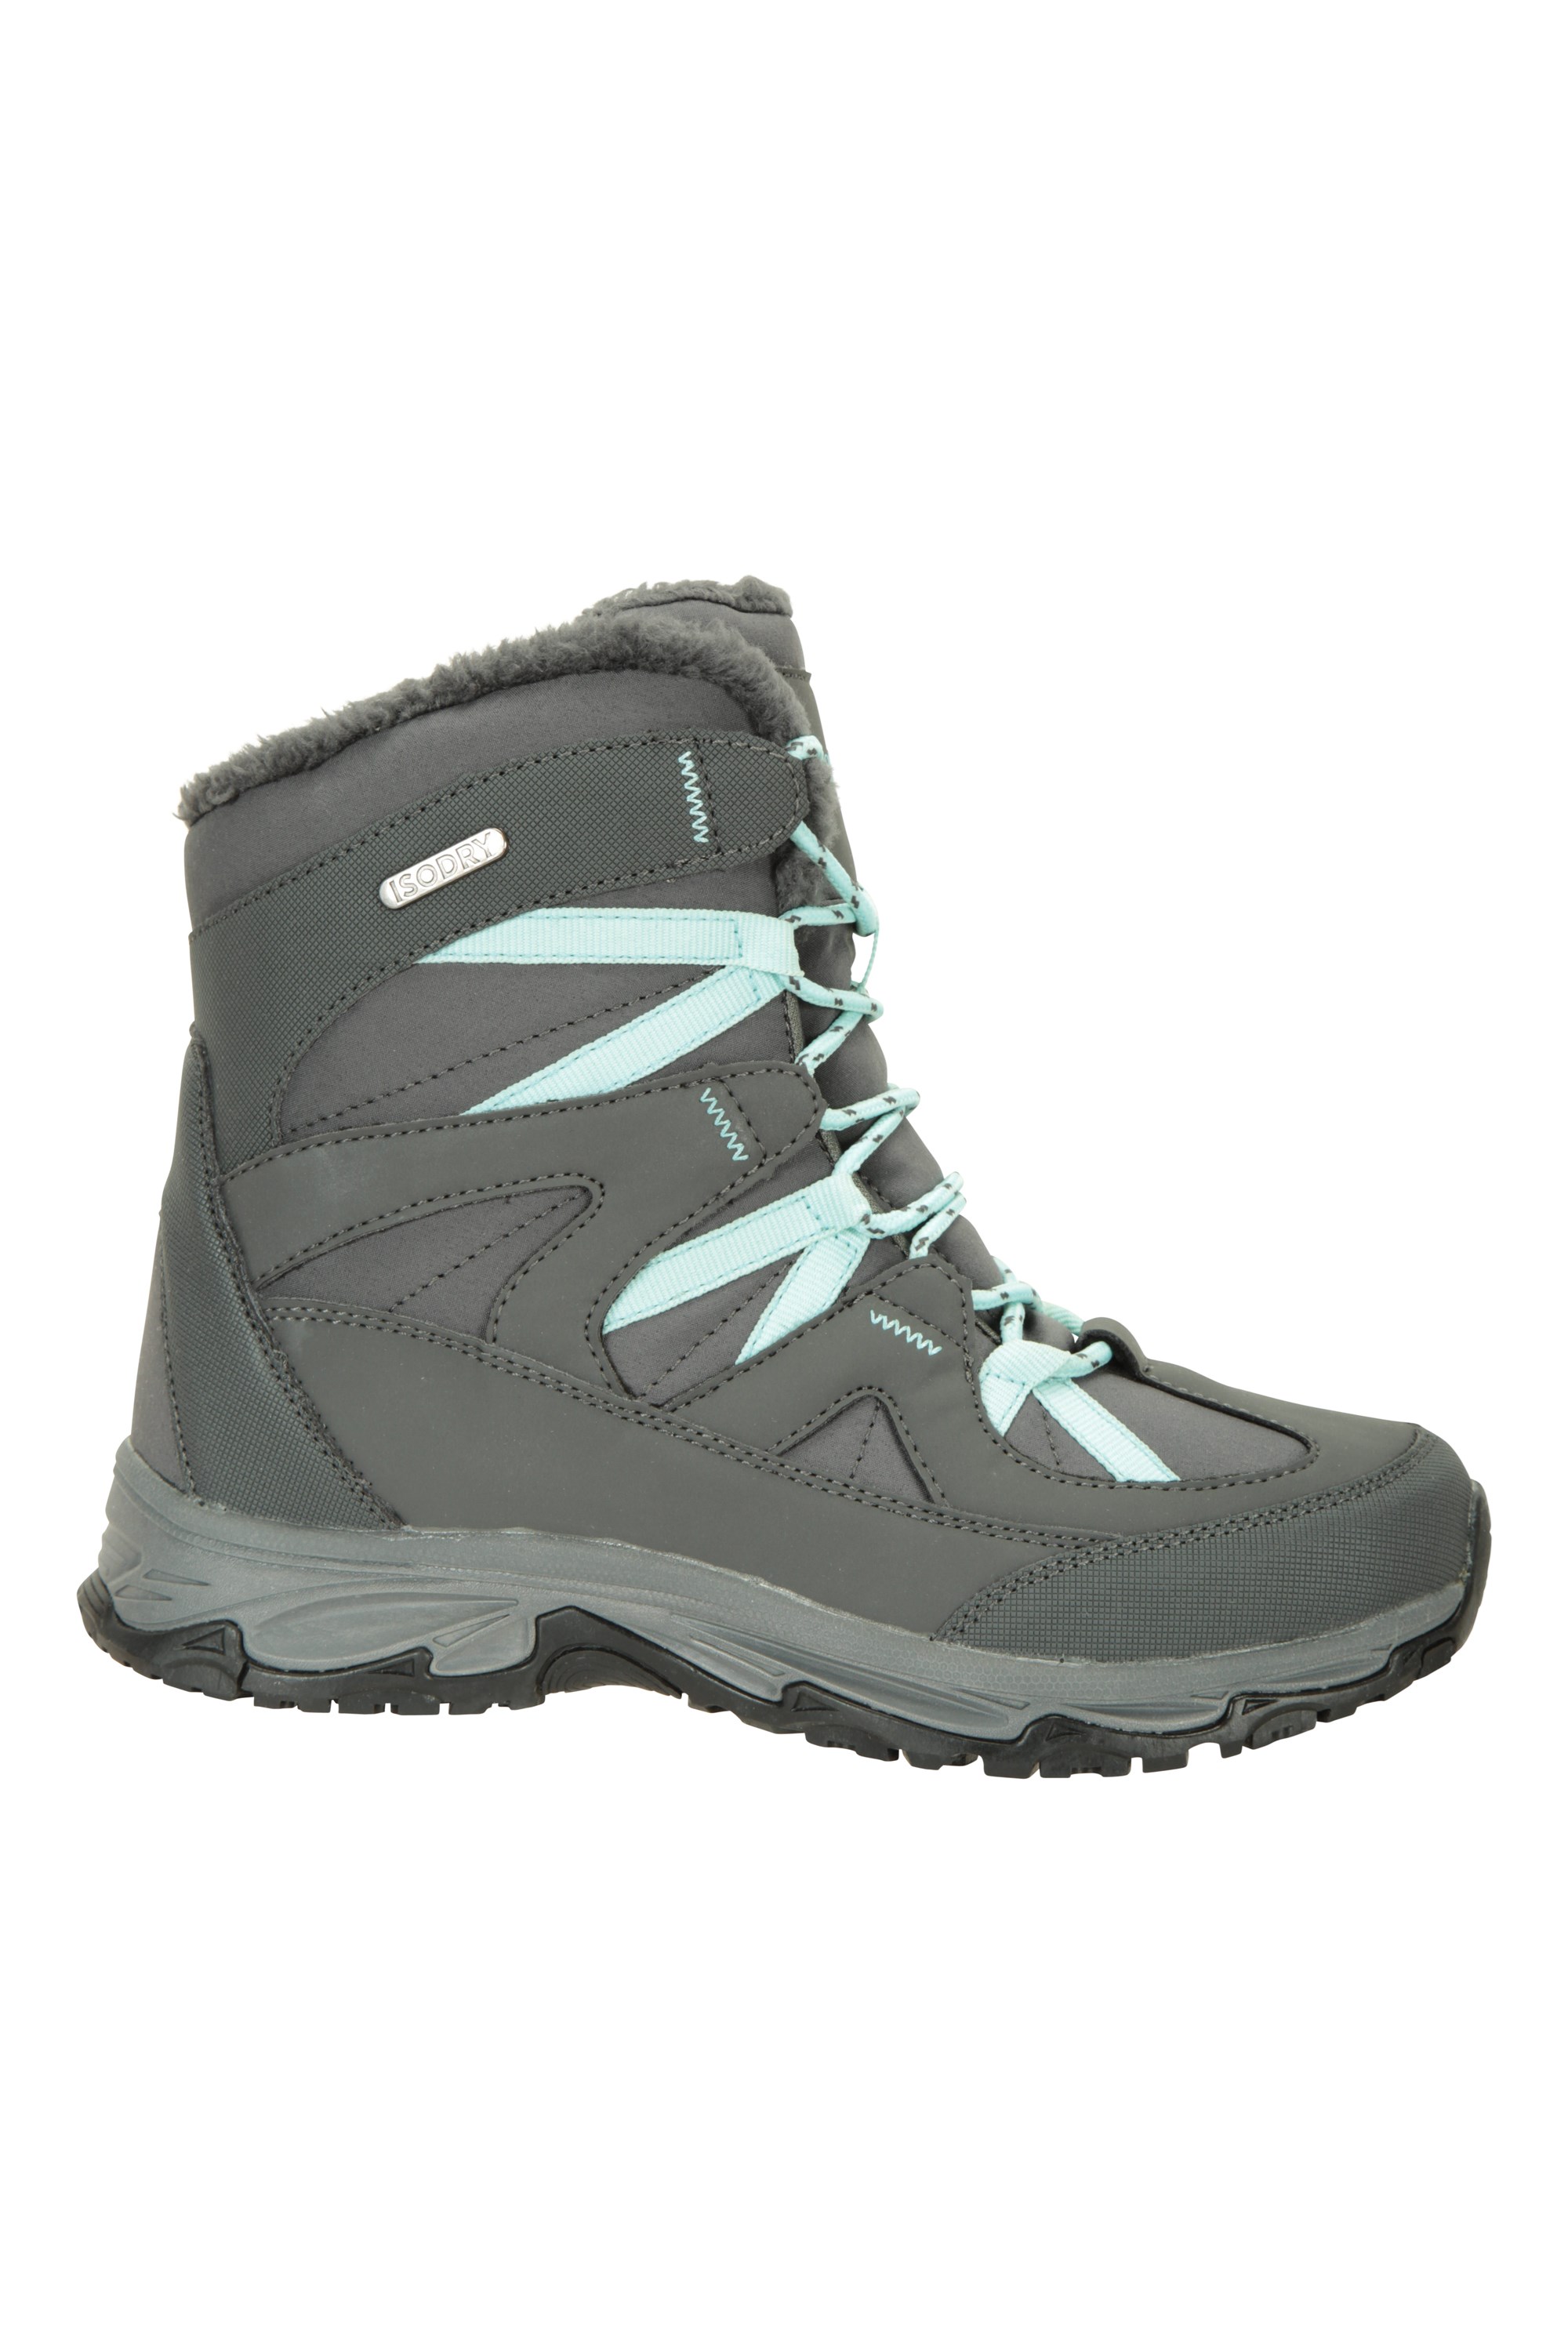 mountain warehouse womens snow boots